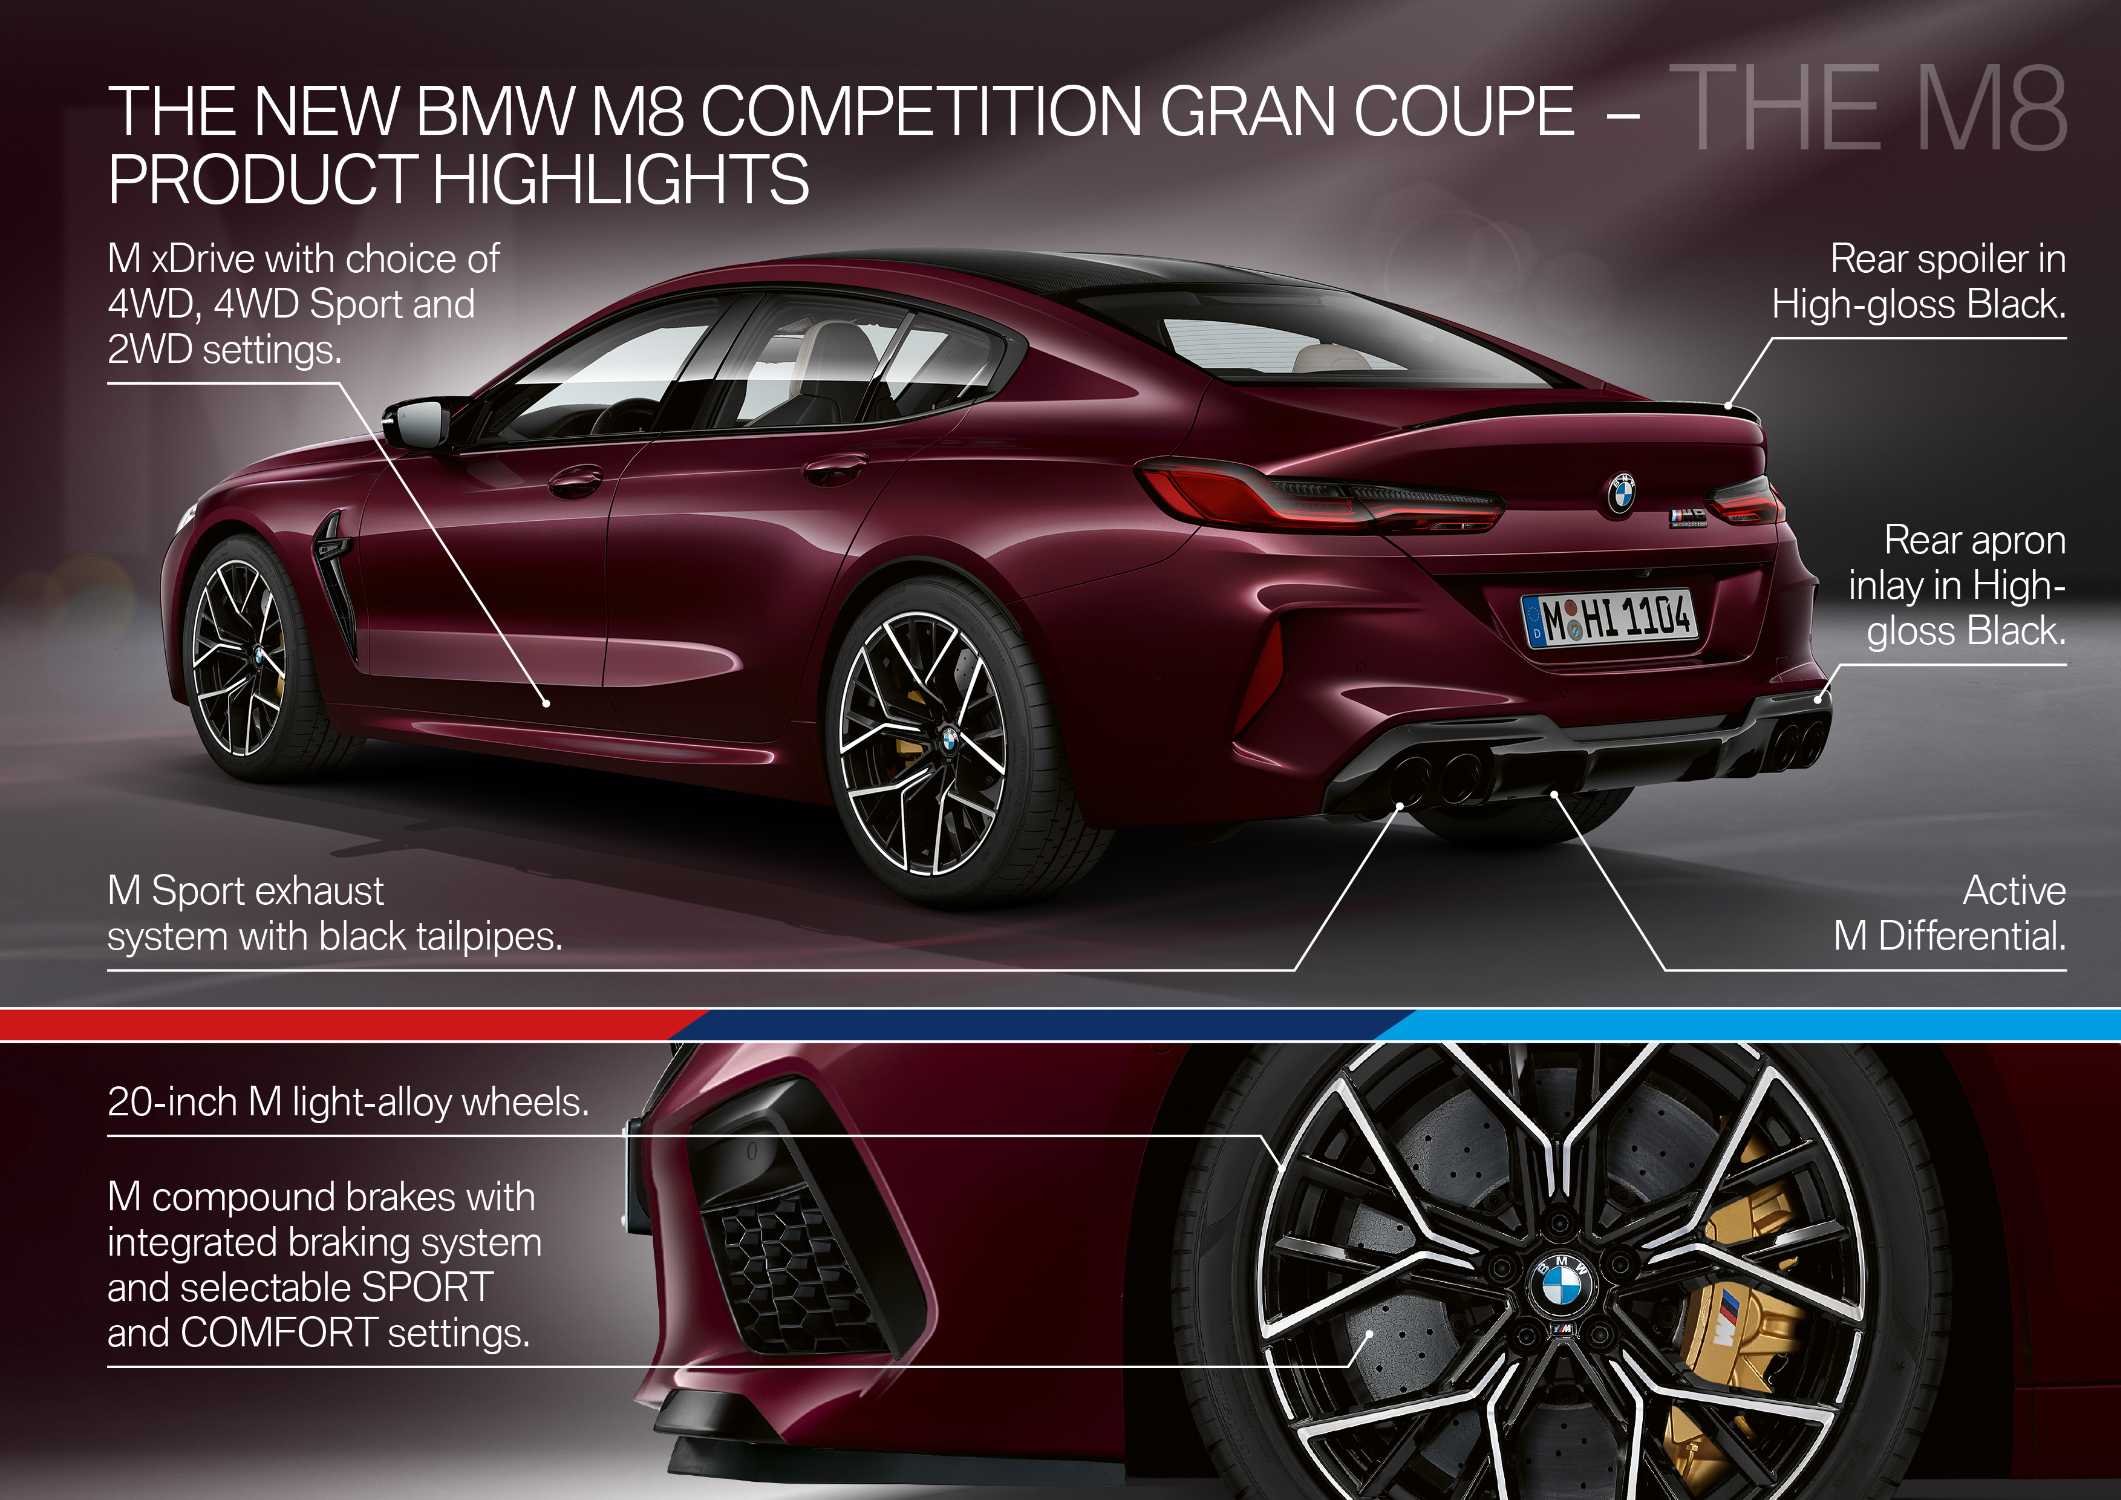 The new BMW M8 Gran Coupe and BMW M8 Competition Gran Coupe (10/2019).